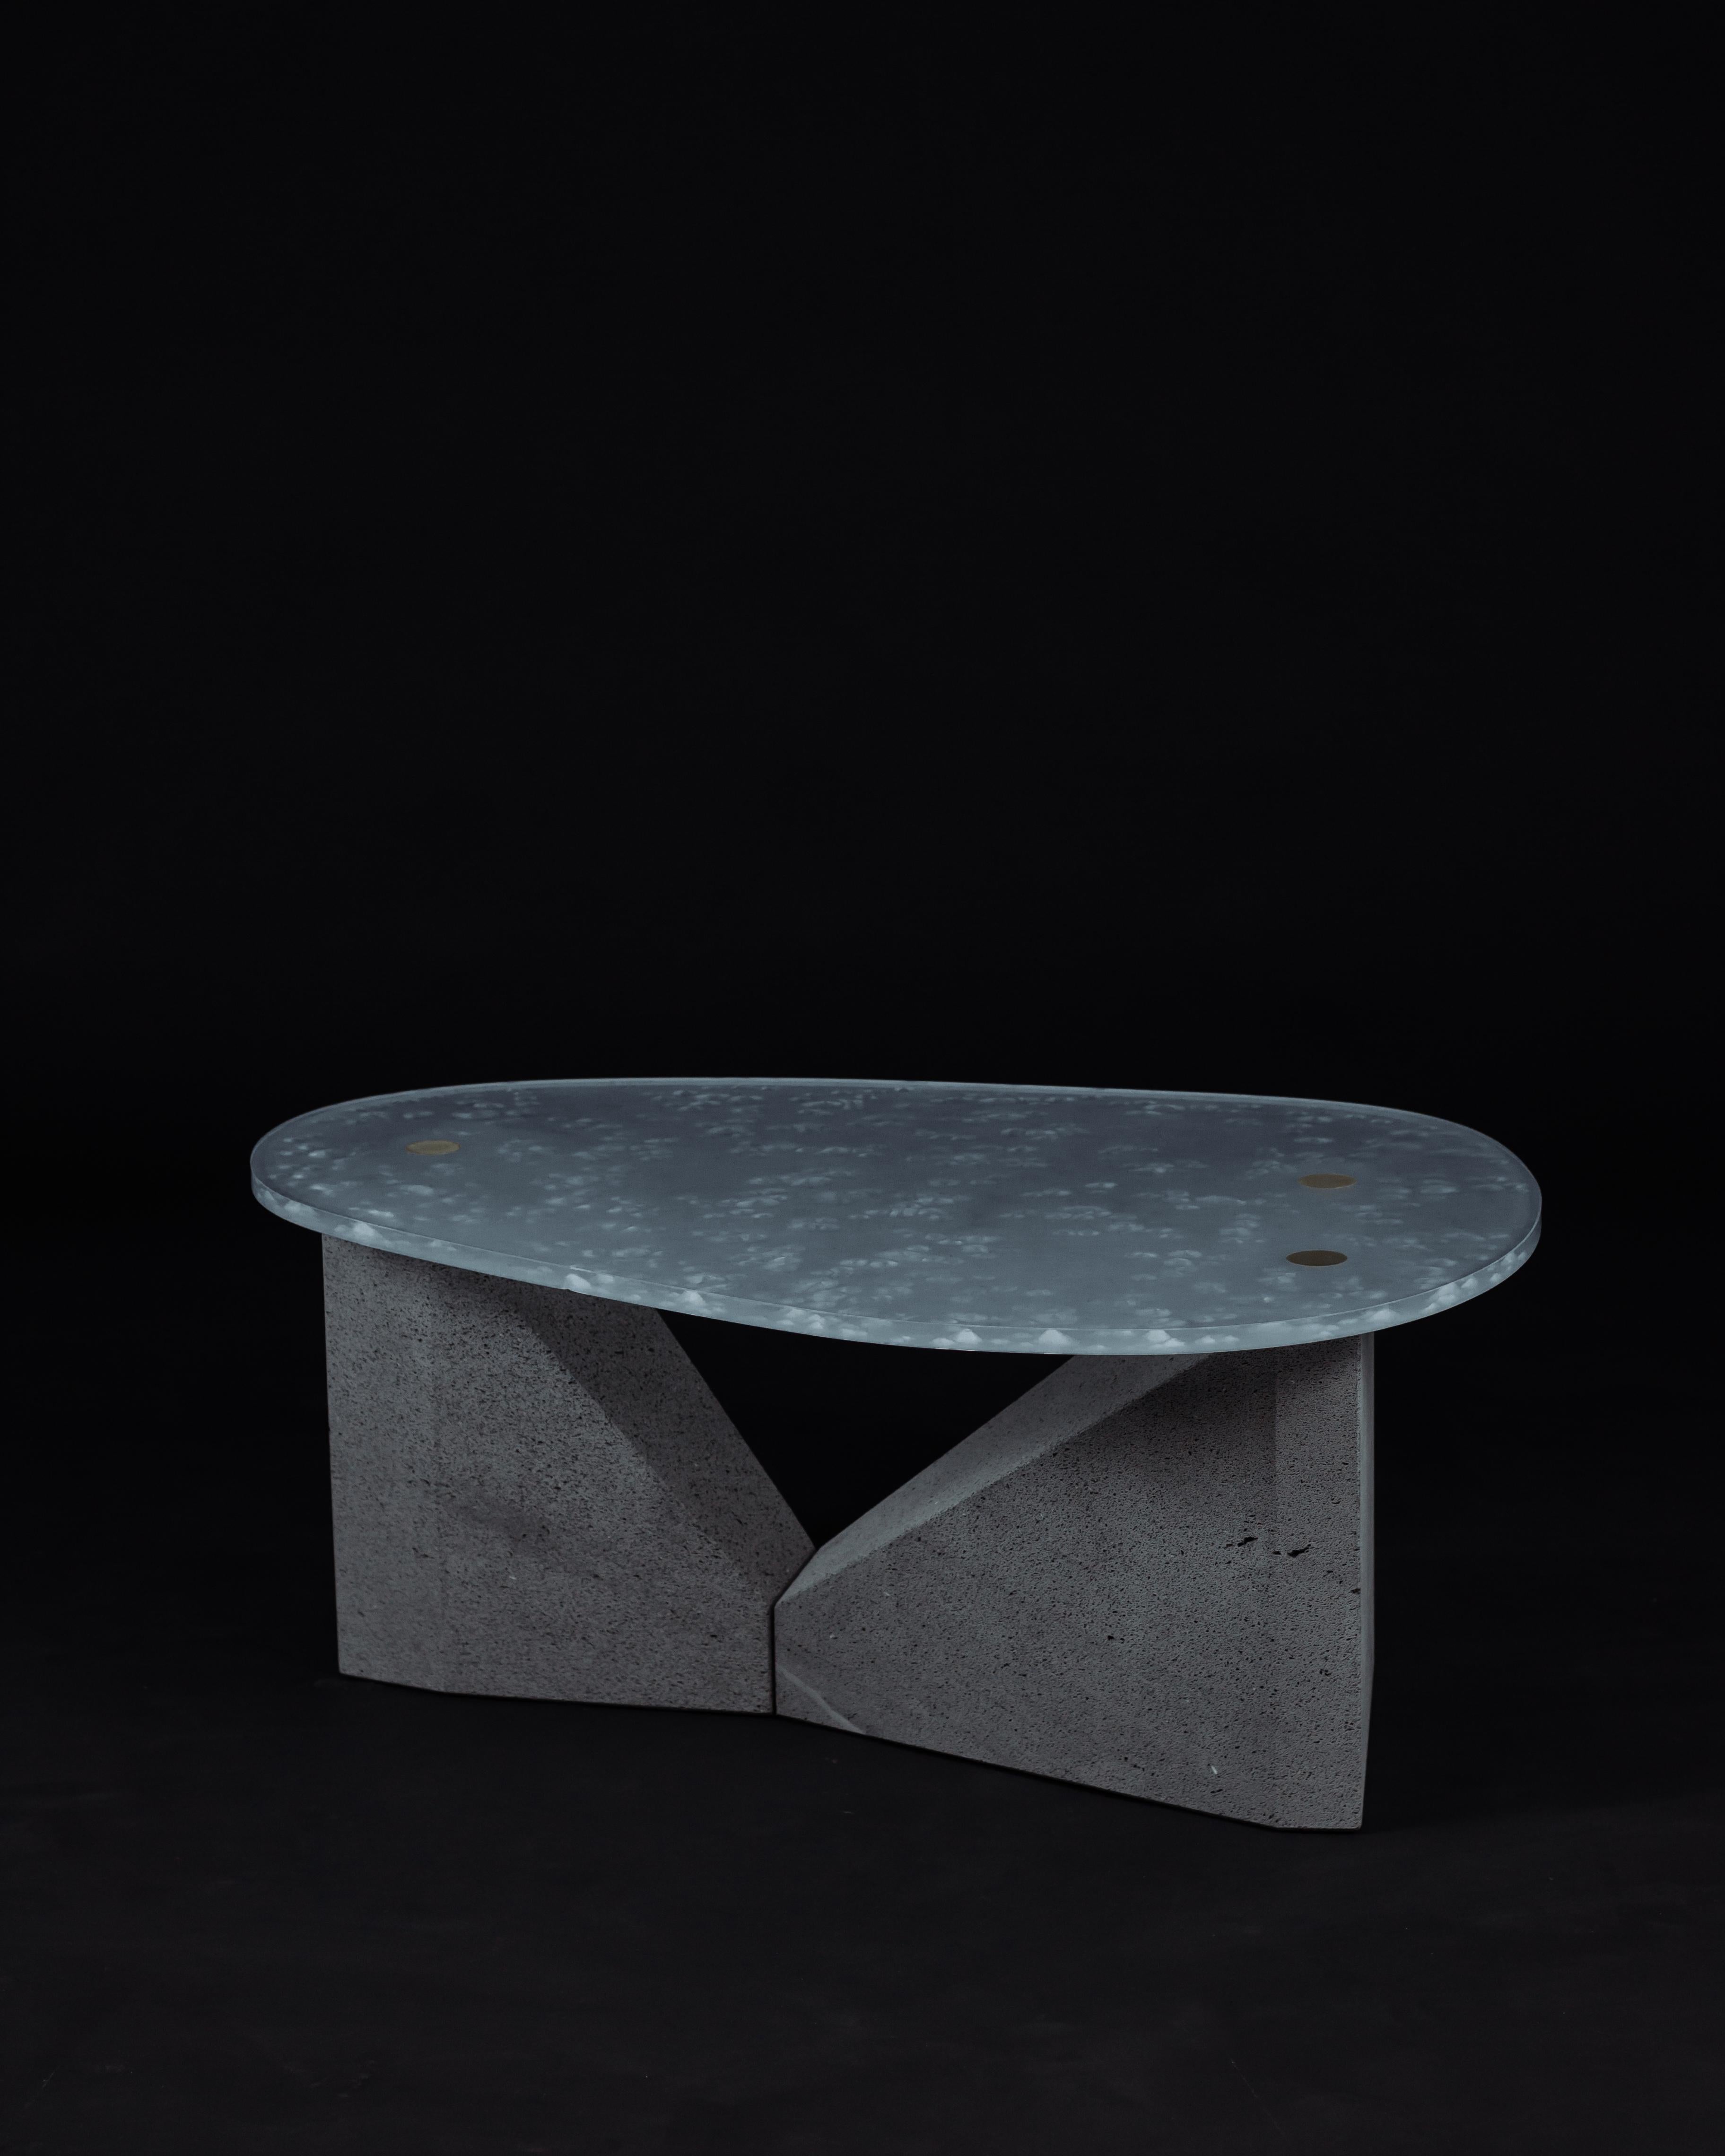 Bel Ava Coffee Table by Studio Nosqua
Dimensions: D 52 x W 34 x H 79 cm
Material: Glass, Lava stone, Brass

Between desertic expanses and frozen mountains, Bela Ava offers you to travel towards fascinating landscapes.

The origins of Nosqua
Nosqua